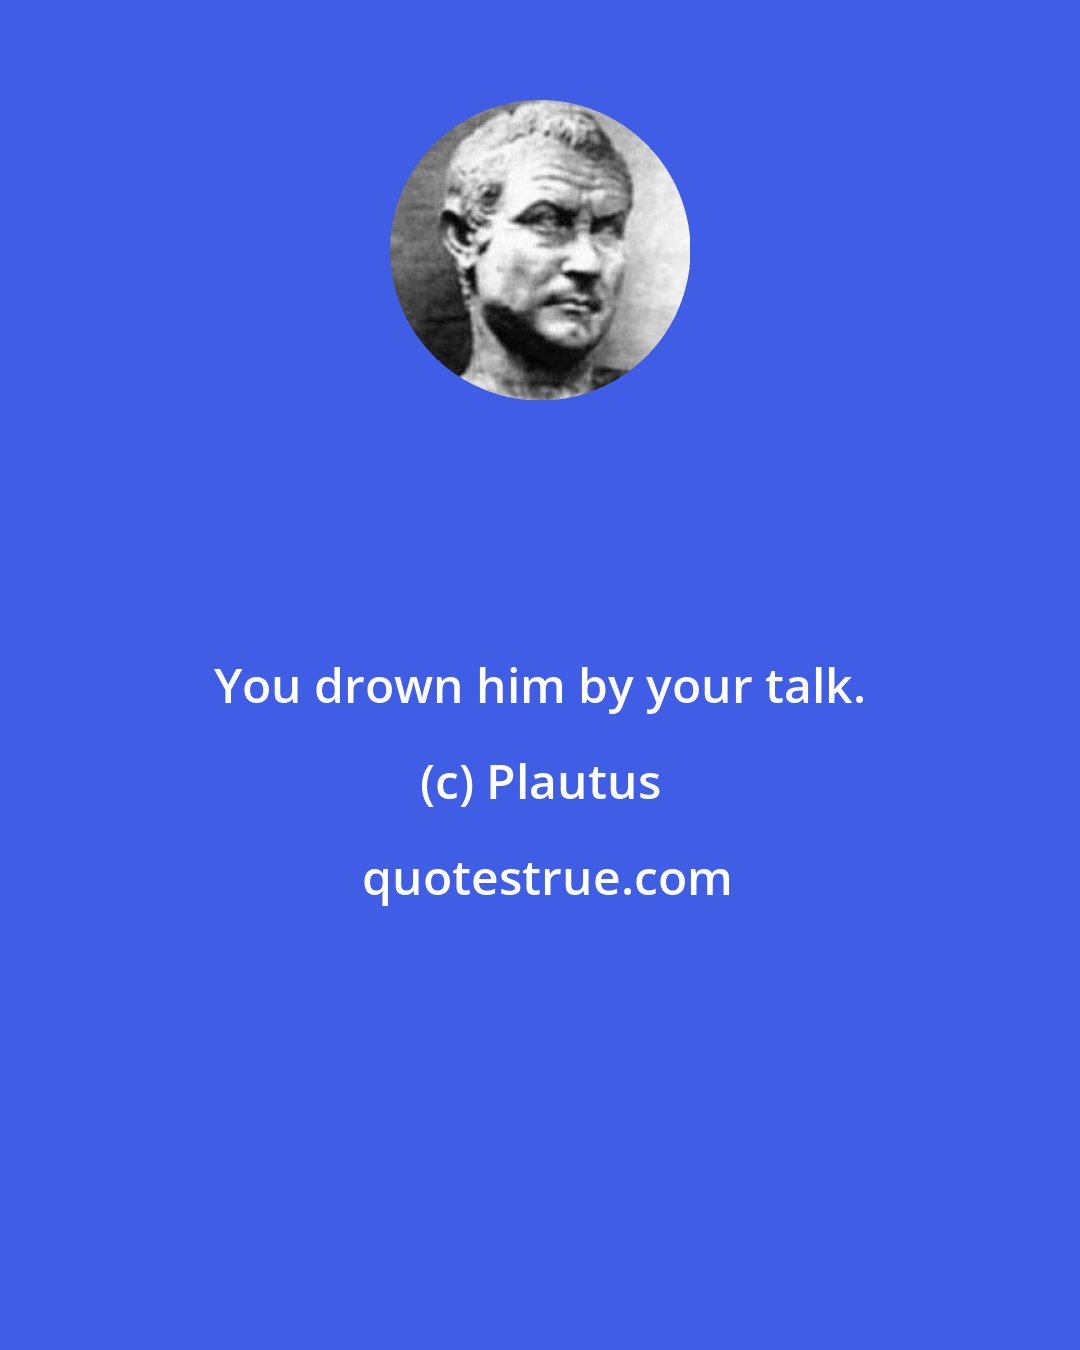 Plautus: You drown him by your talk.